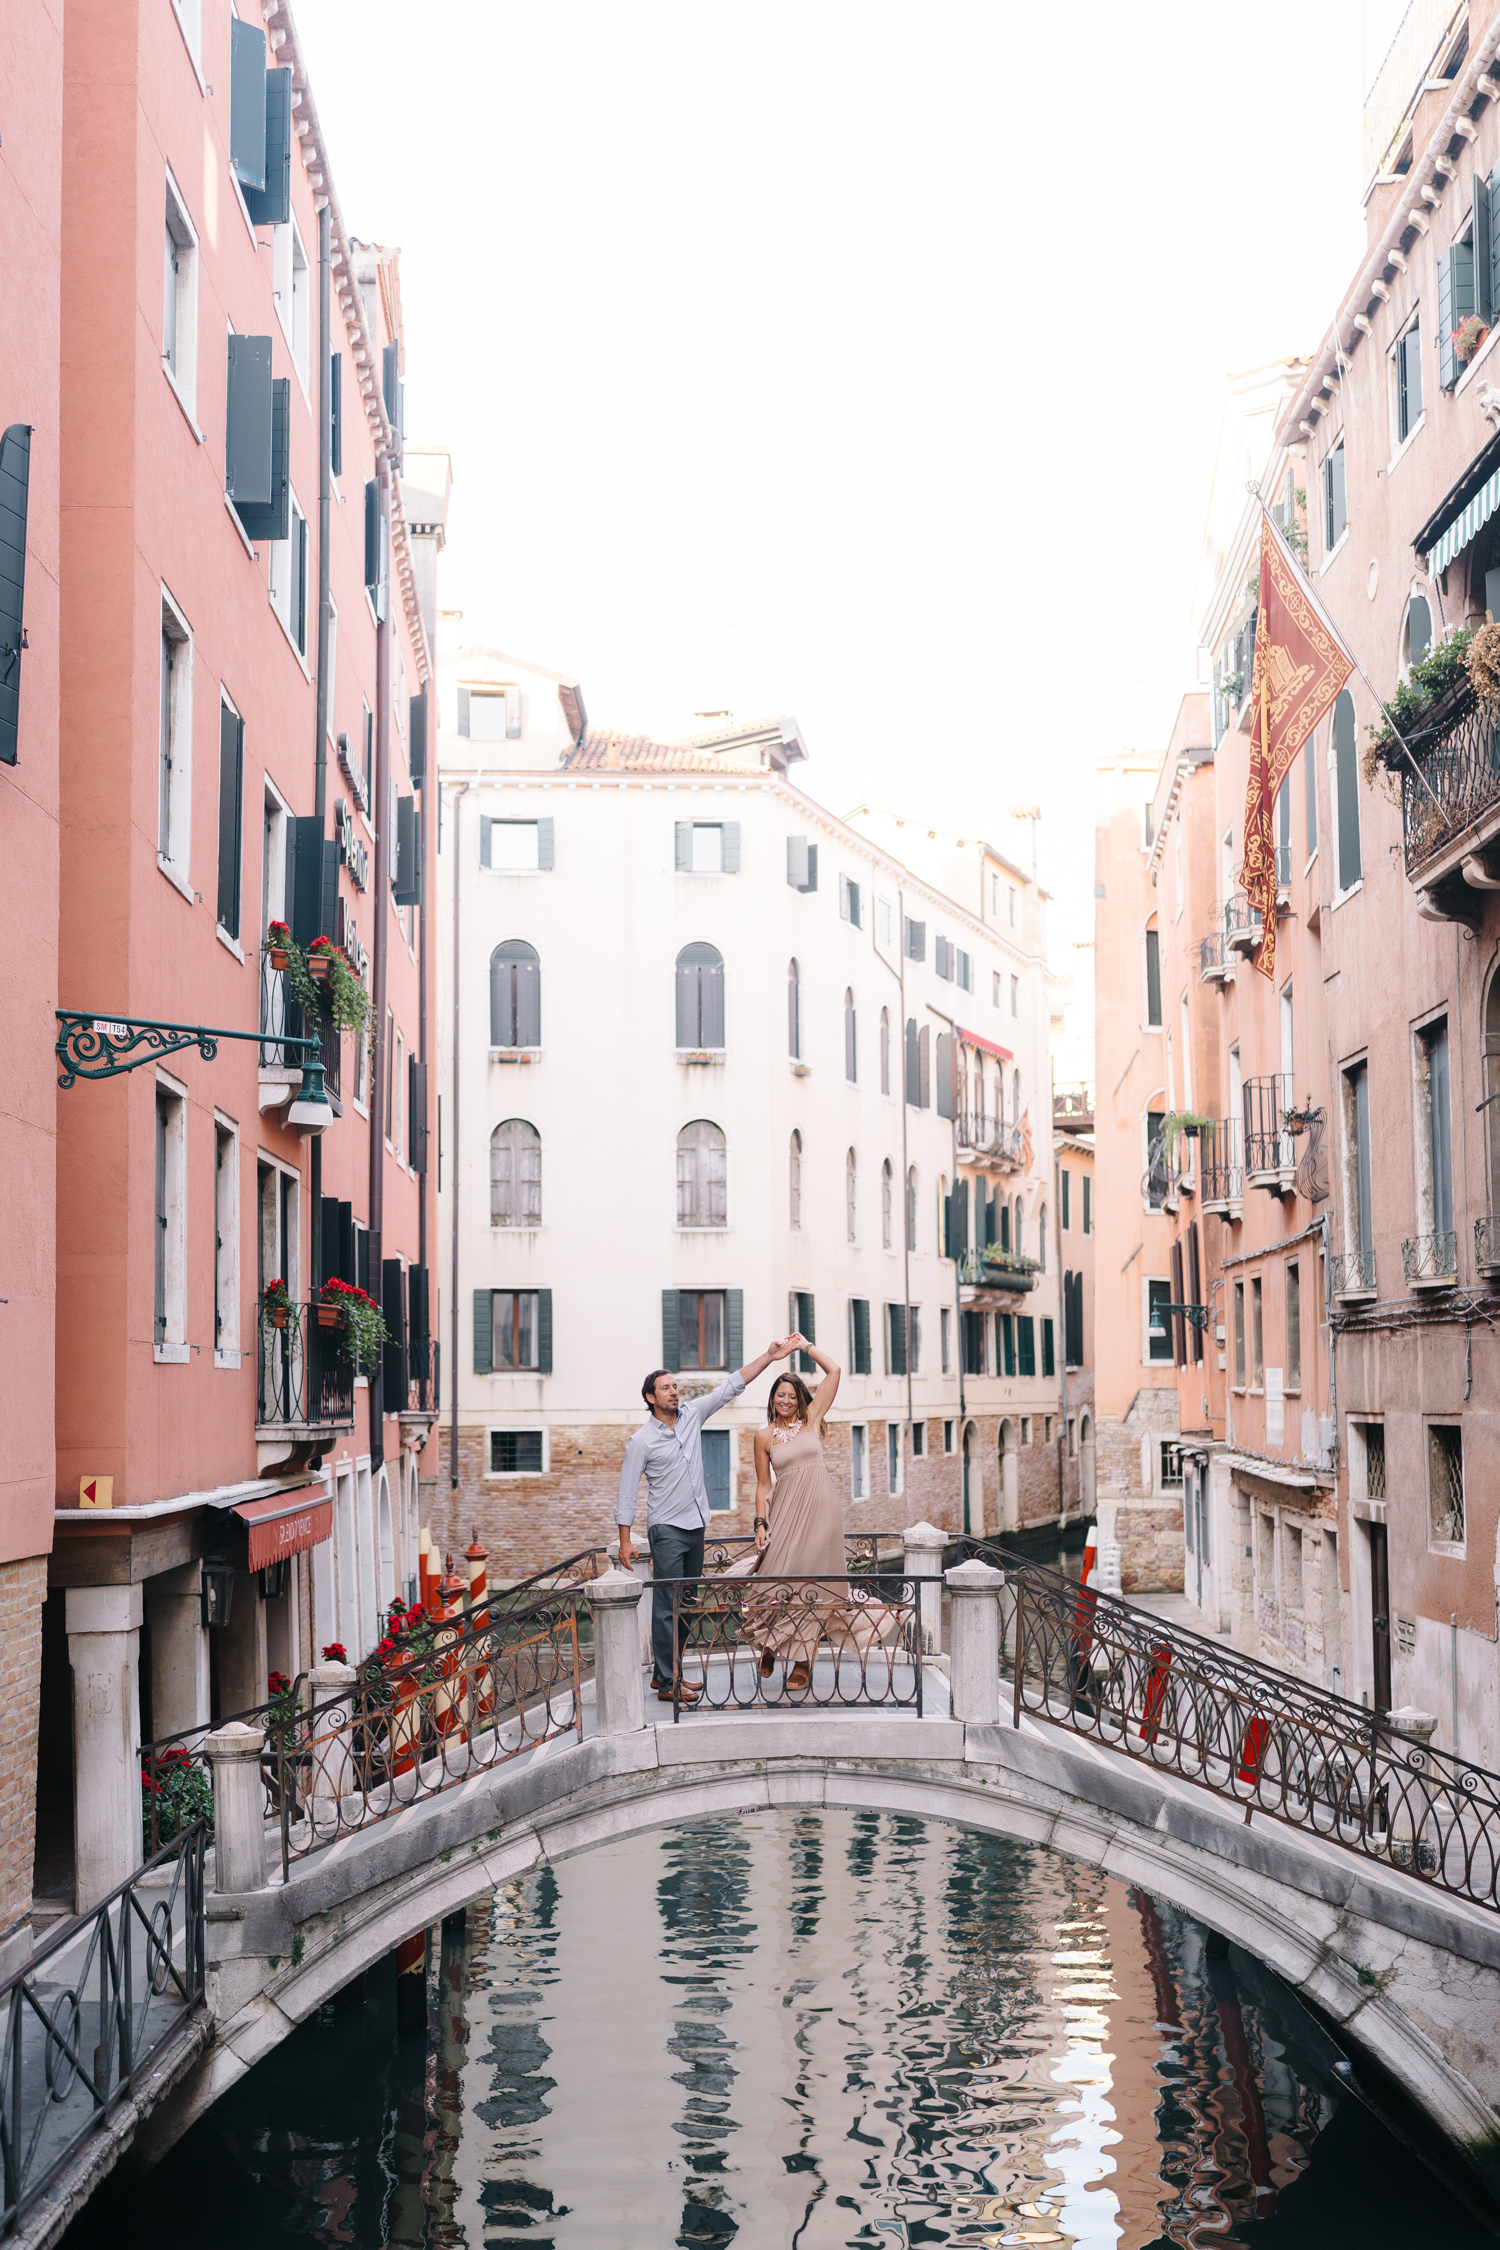 What are the best places to take couples photos in Venice? Look at this photoshoot and learn about the top spots for photoshoot in Italy